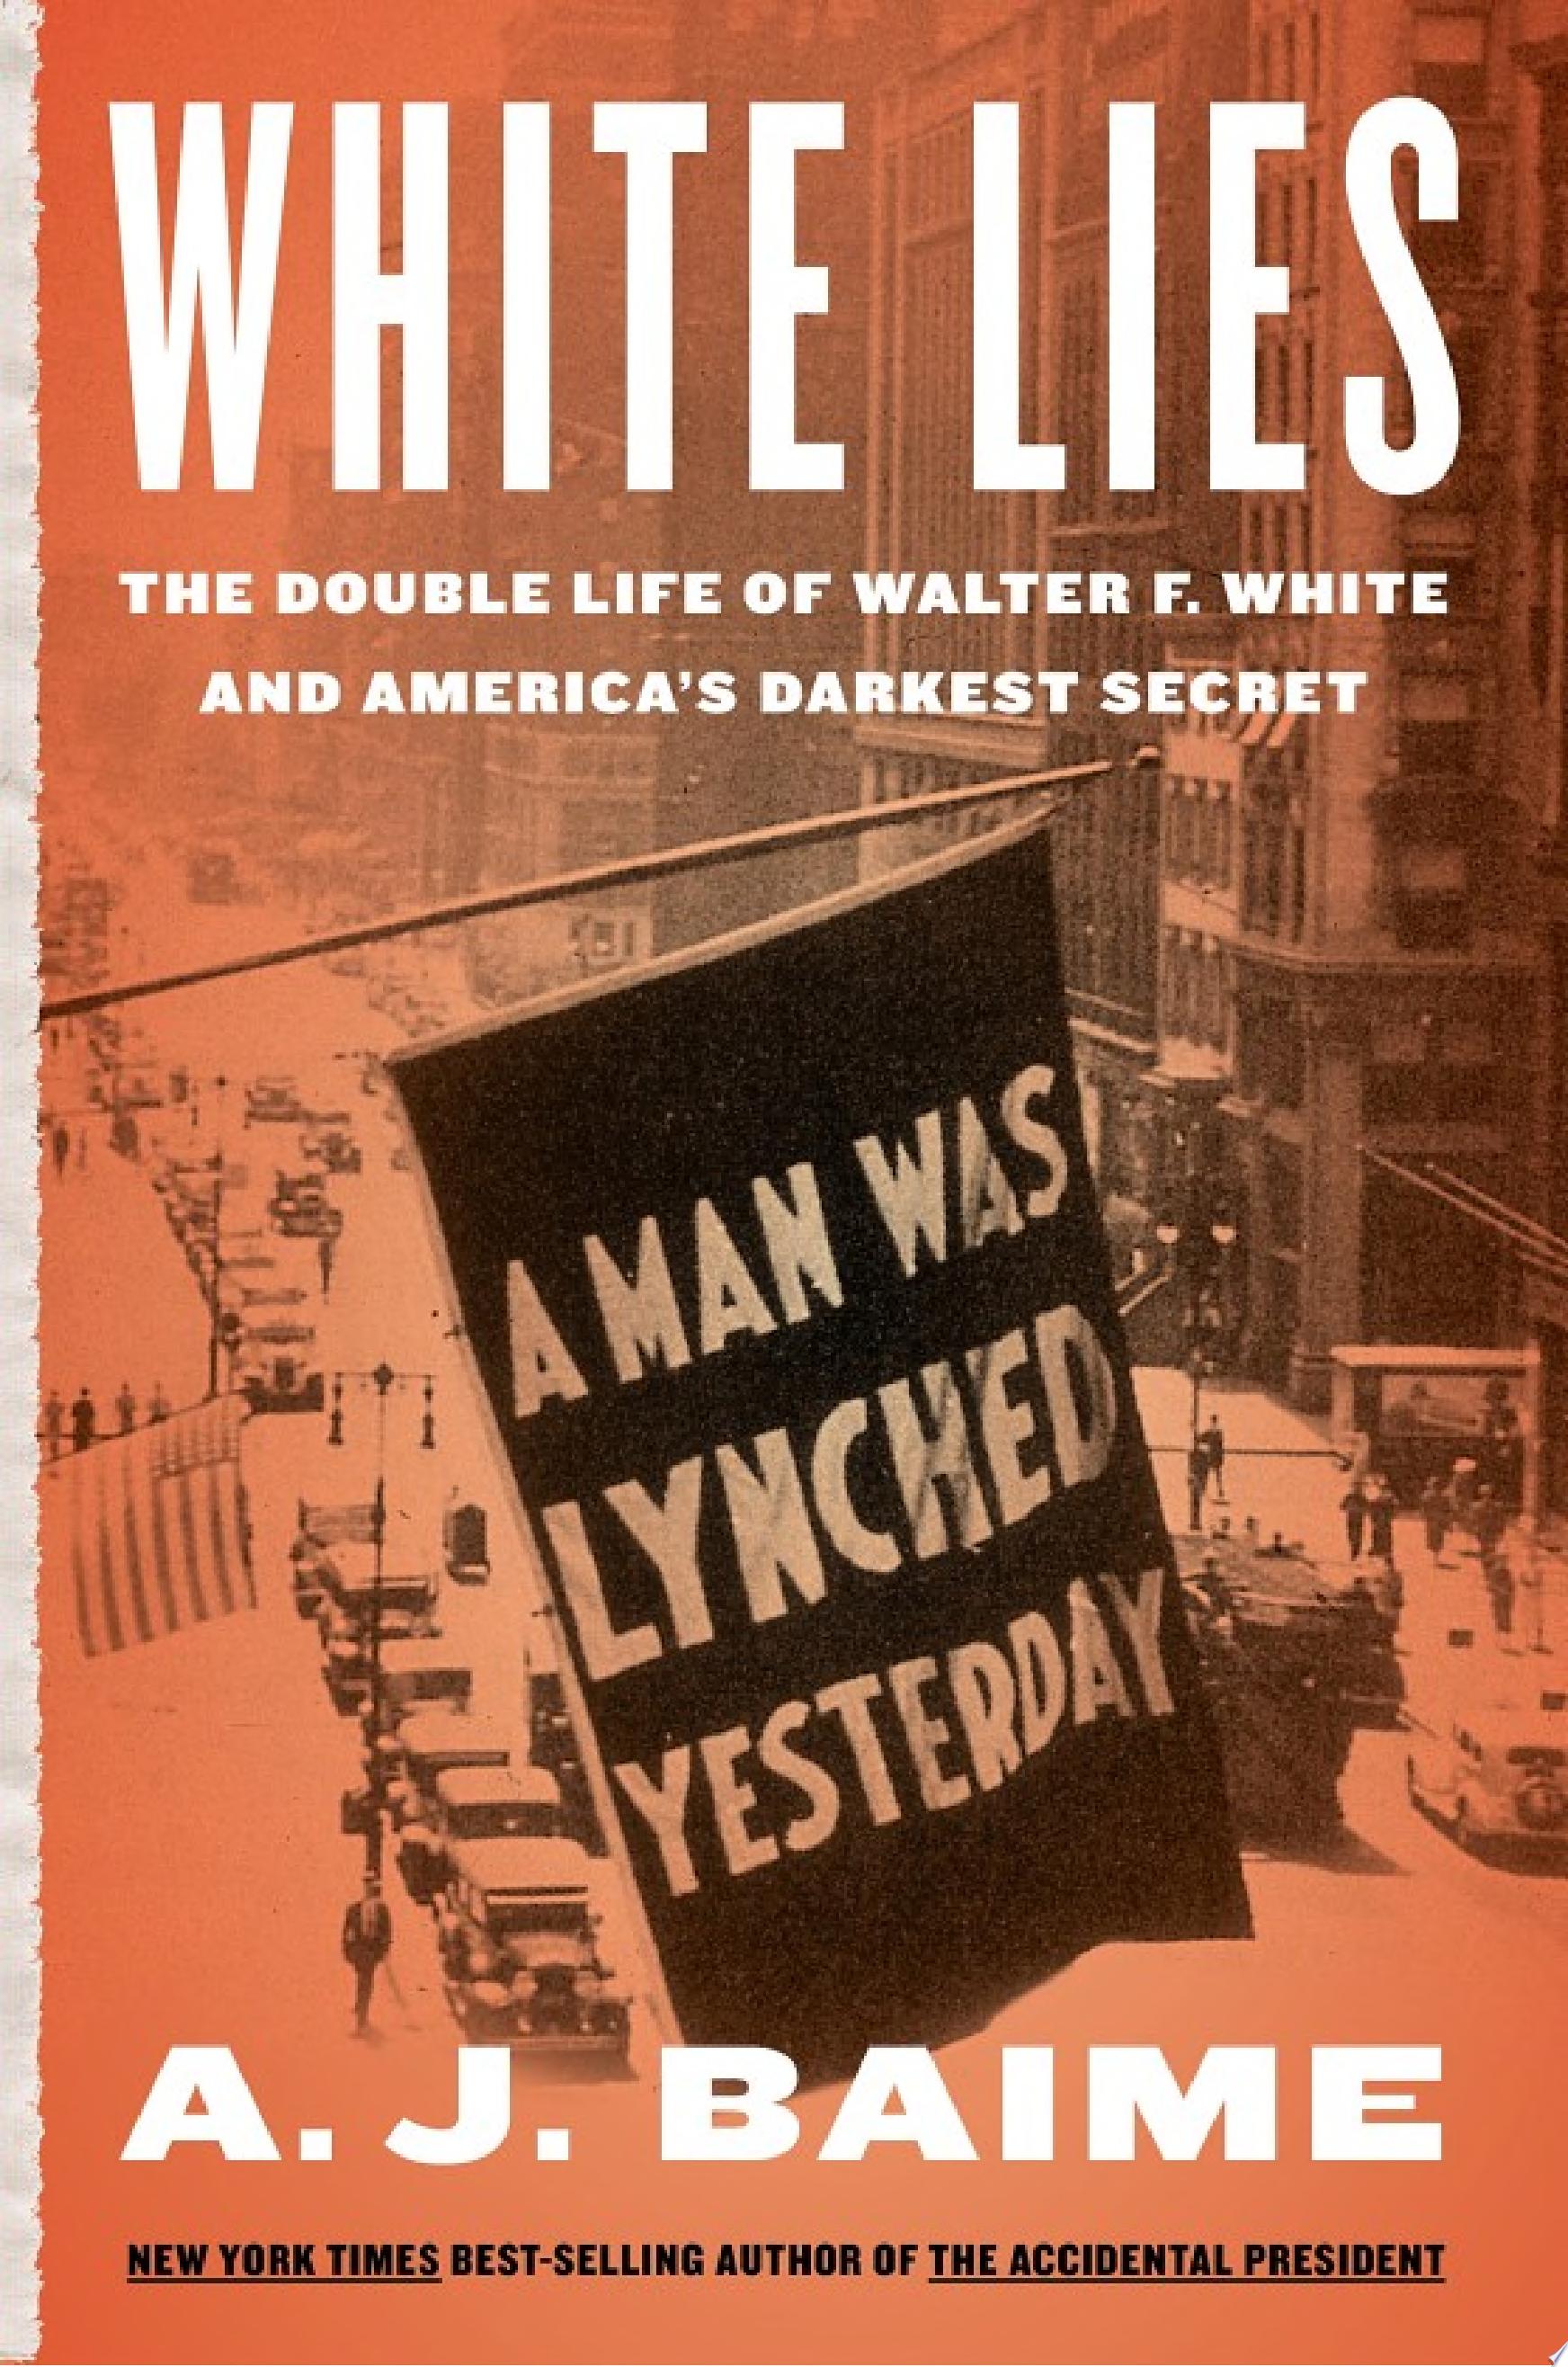 Image for "White Lies"